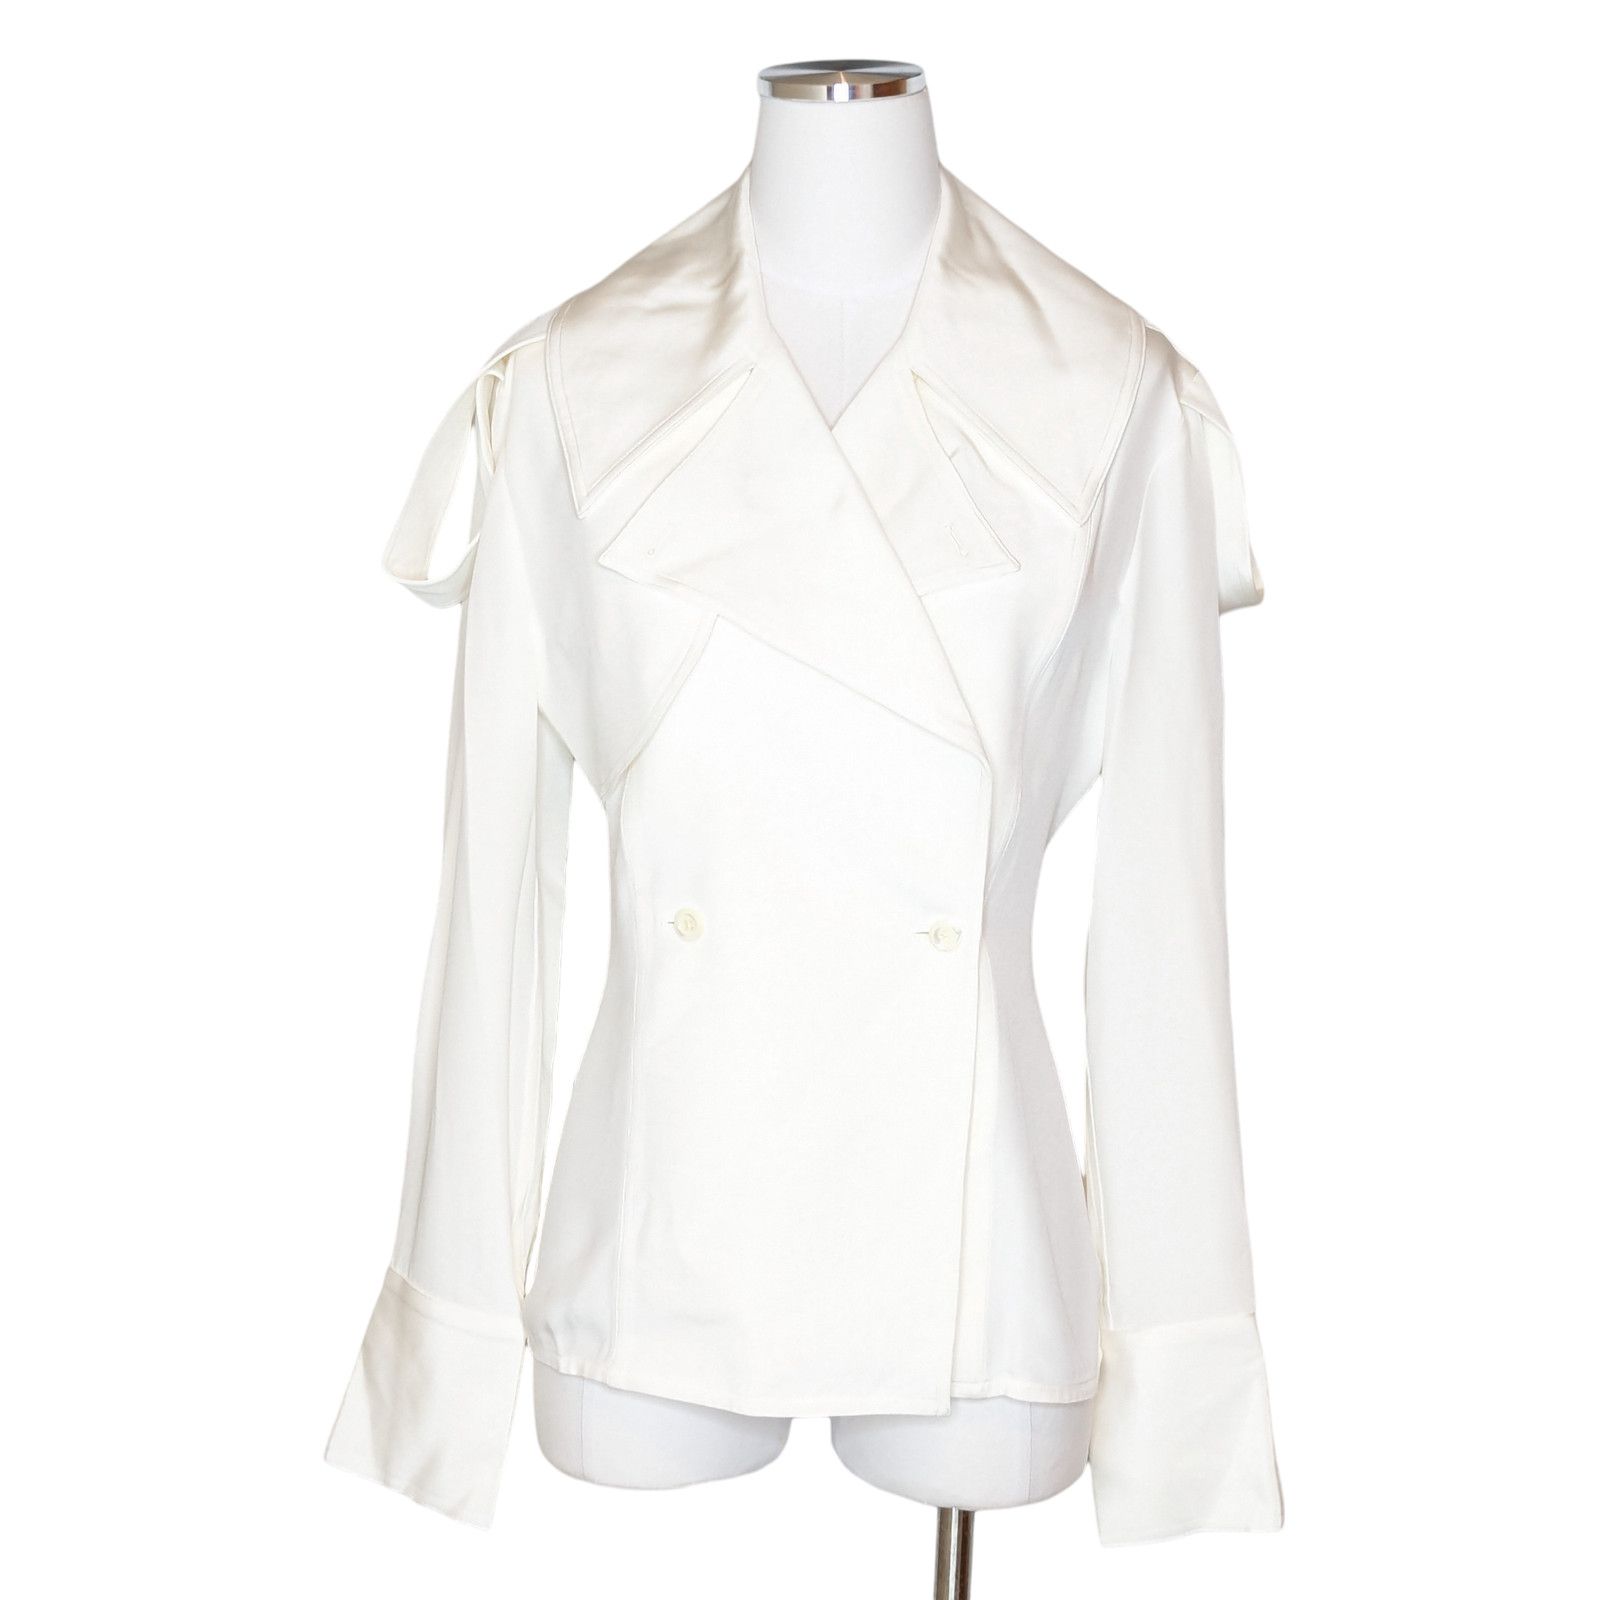 【Peter Do】Trench Blouse White 38季節感冬春秋夏